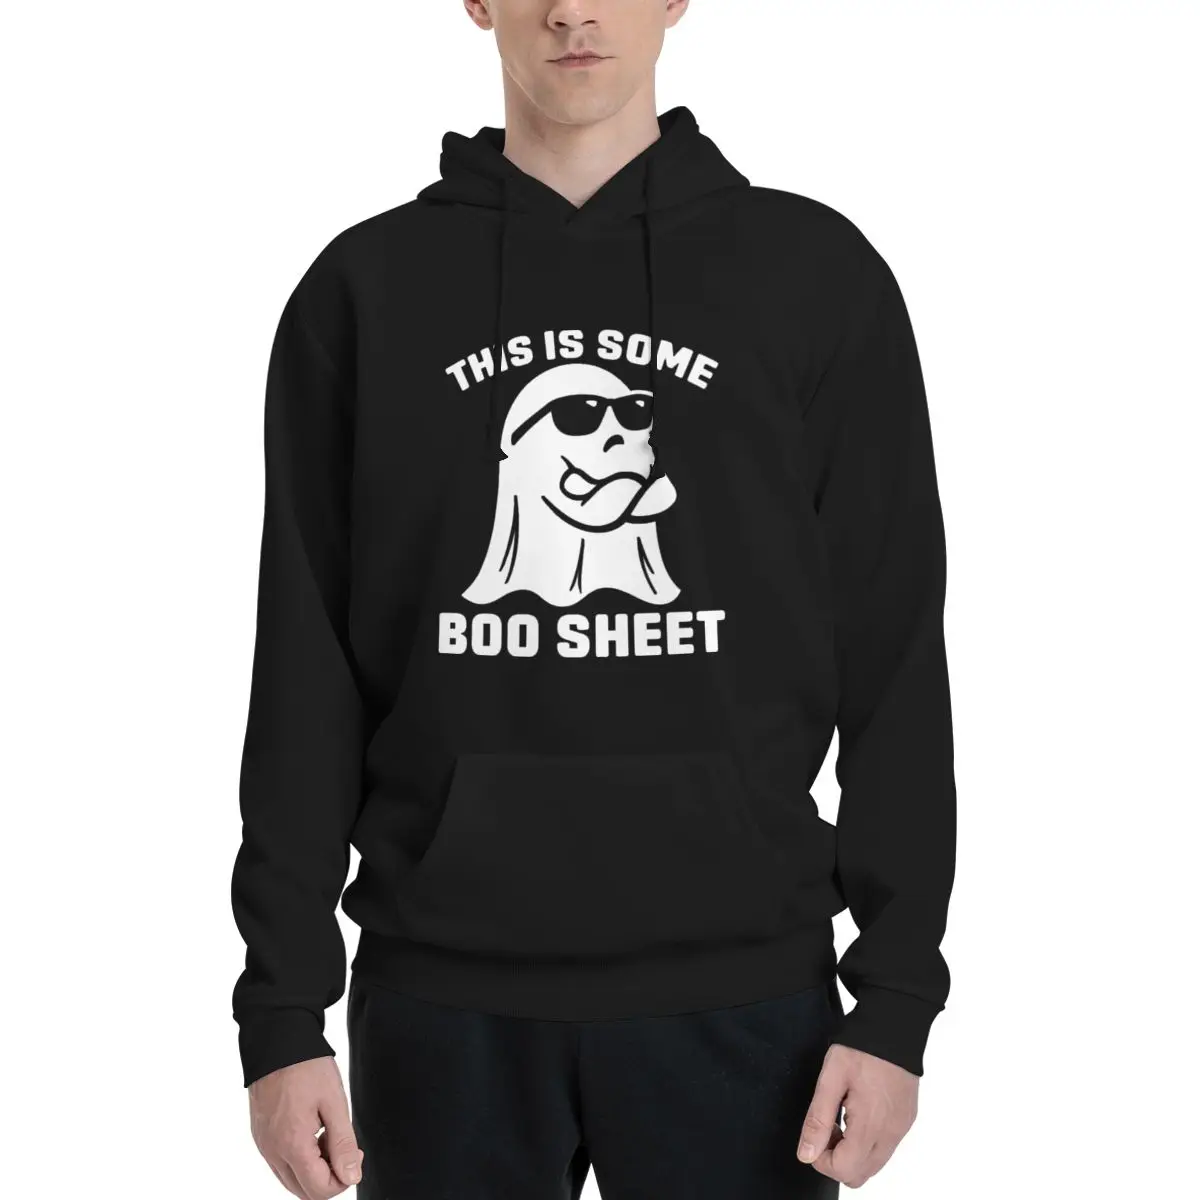 

This Is Some Boo Sheet Polyester Hoodie Men's Women's Sweater Size XXS-3XL